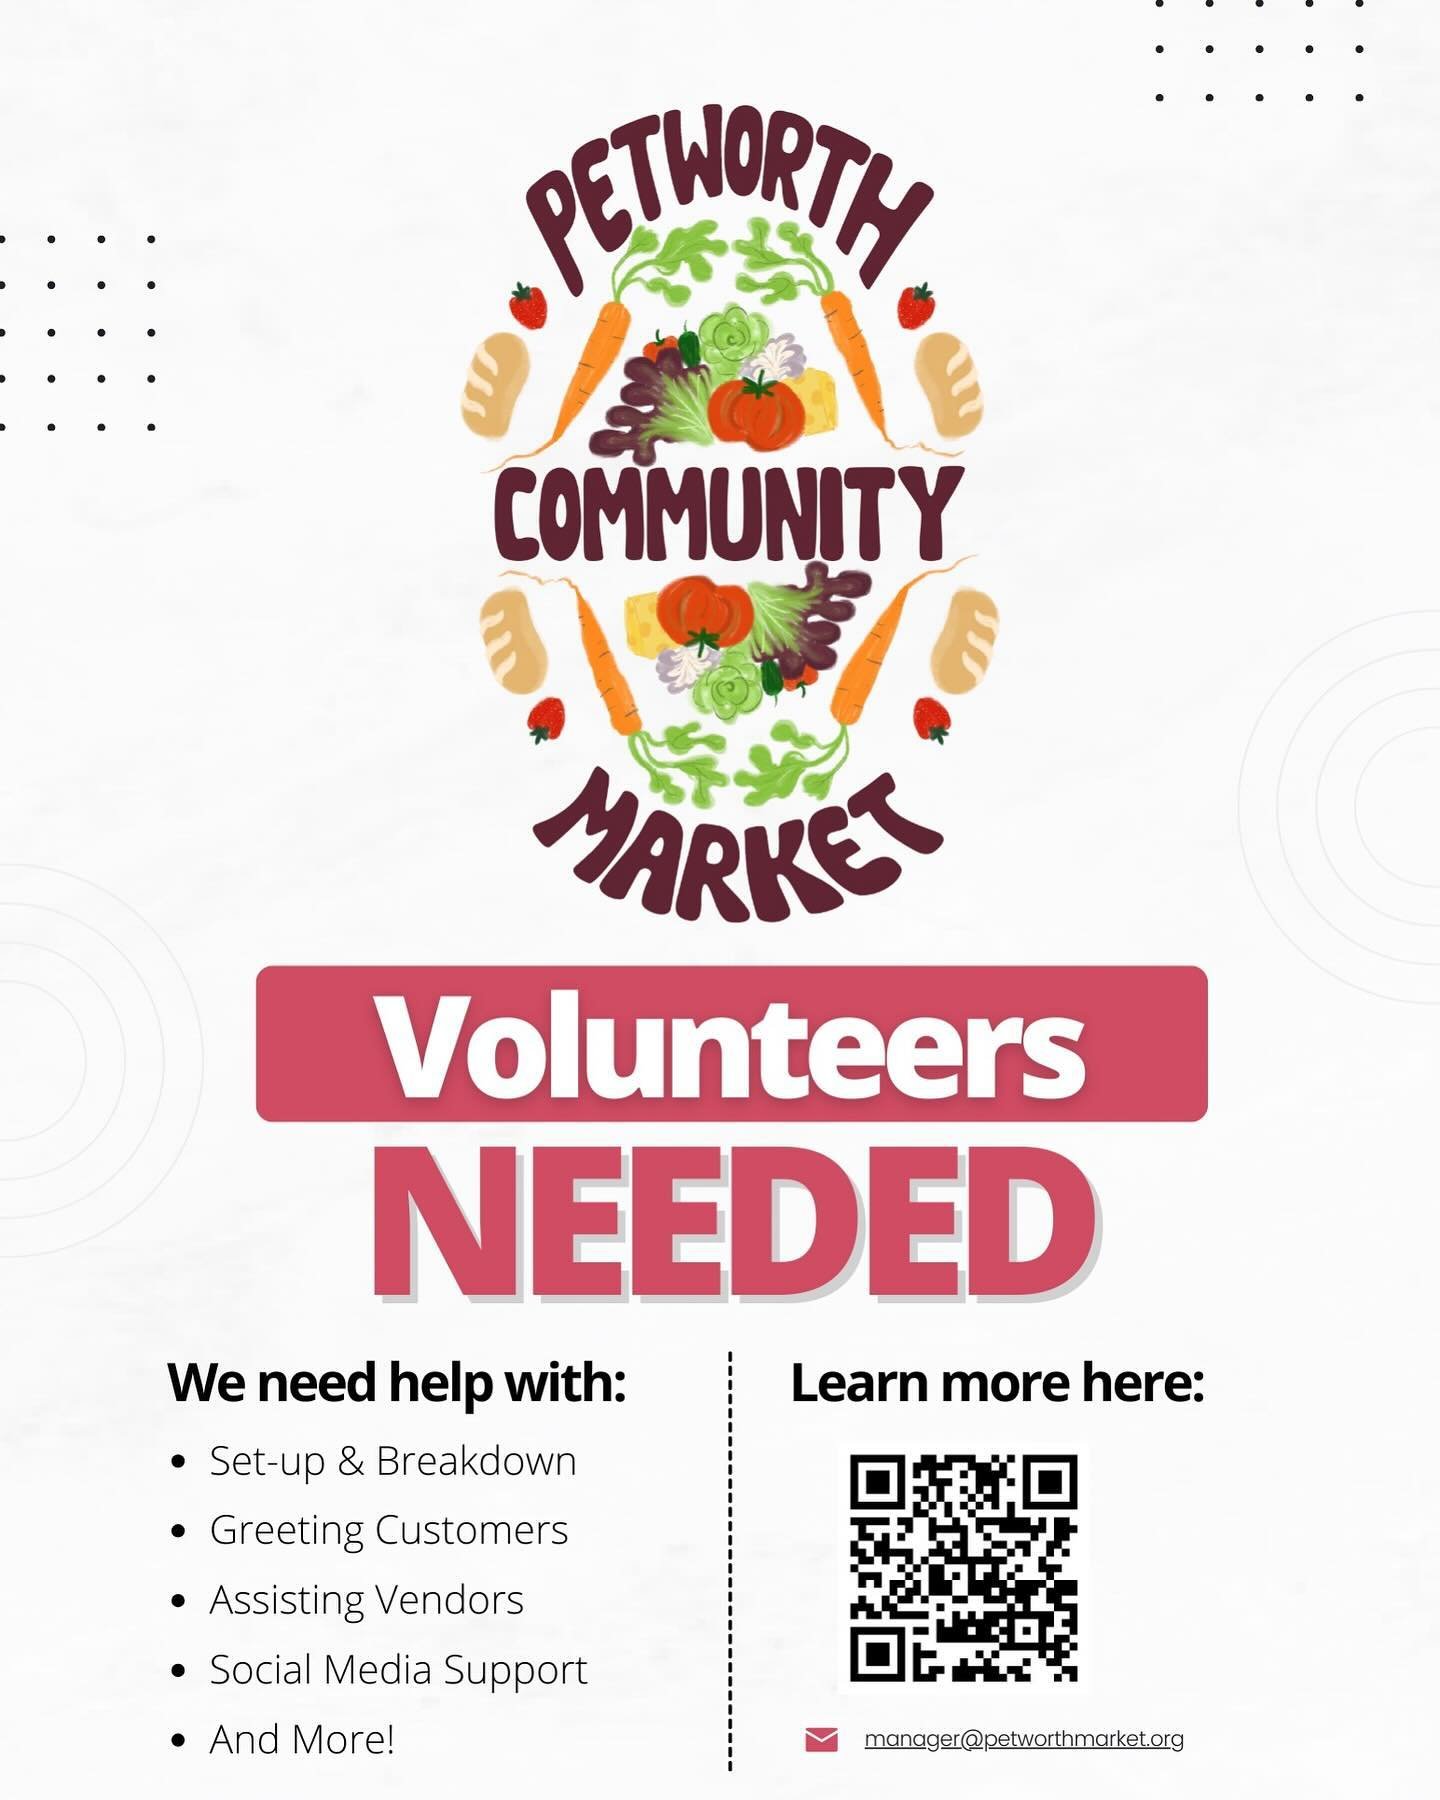 🌱🛒 Join our vibrant community at the Petworth Farmers Market! 🛒🌱
We&rsquo;re looking for passionate volunteers to help us bring fresh produce and local goods to our neighborhood every week. Whether you&rsquo;re a market regular or new to the scen